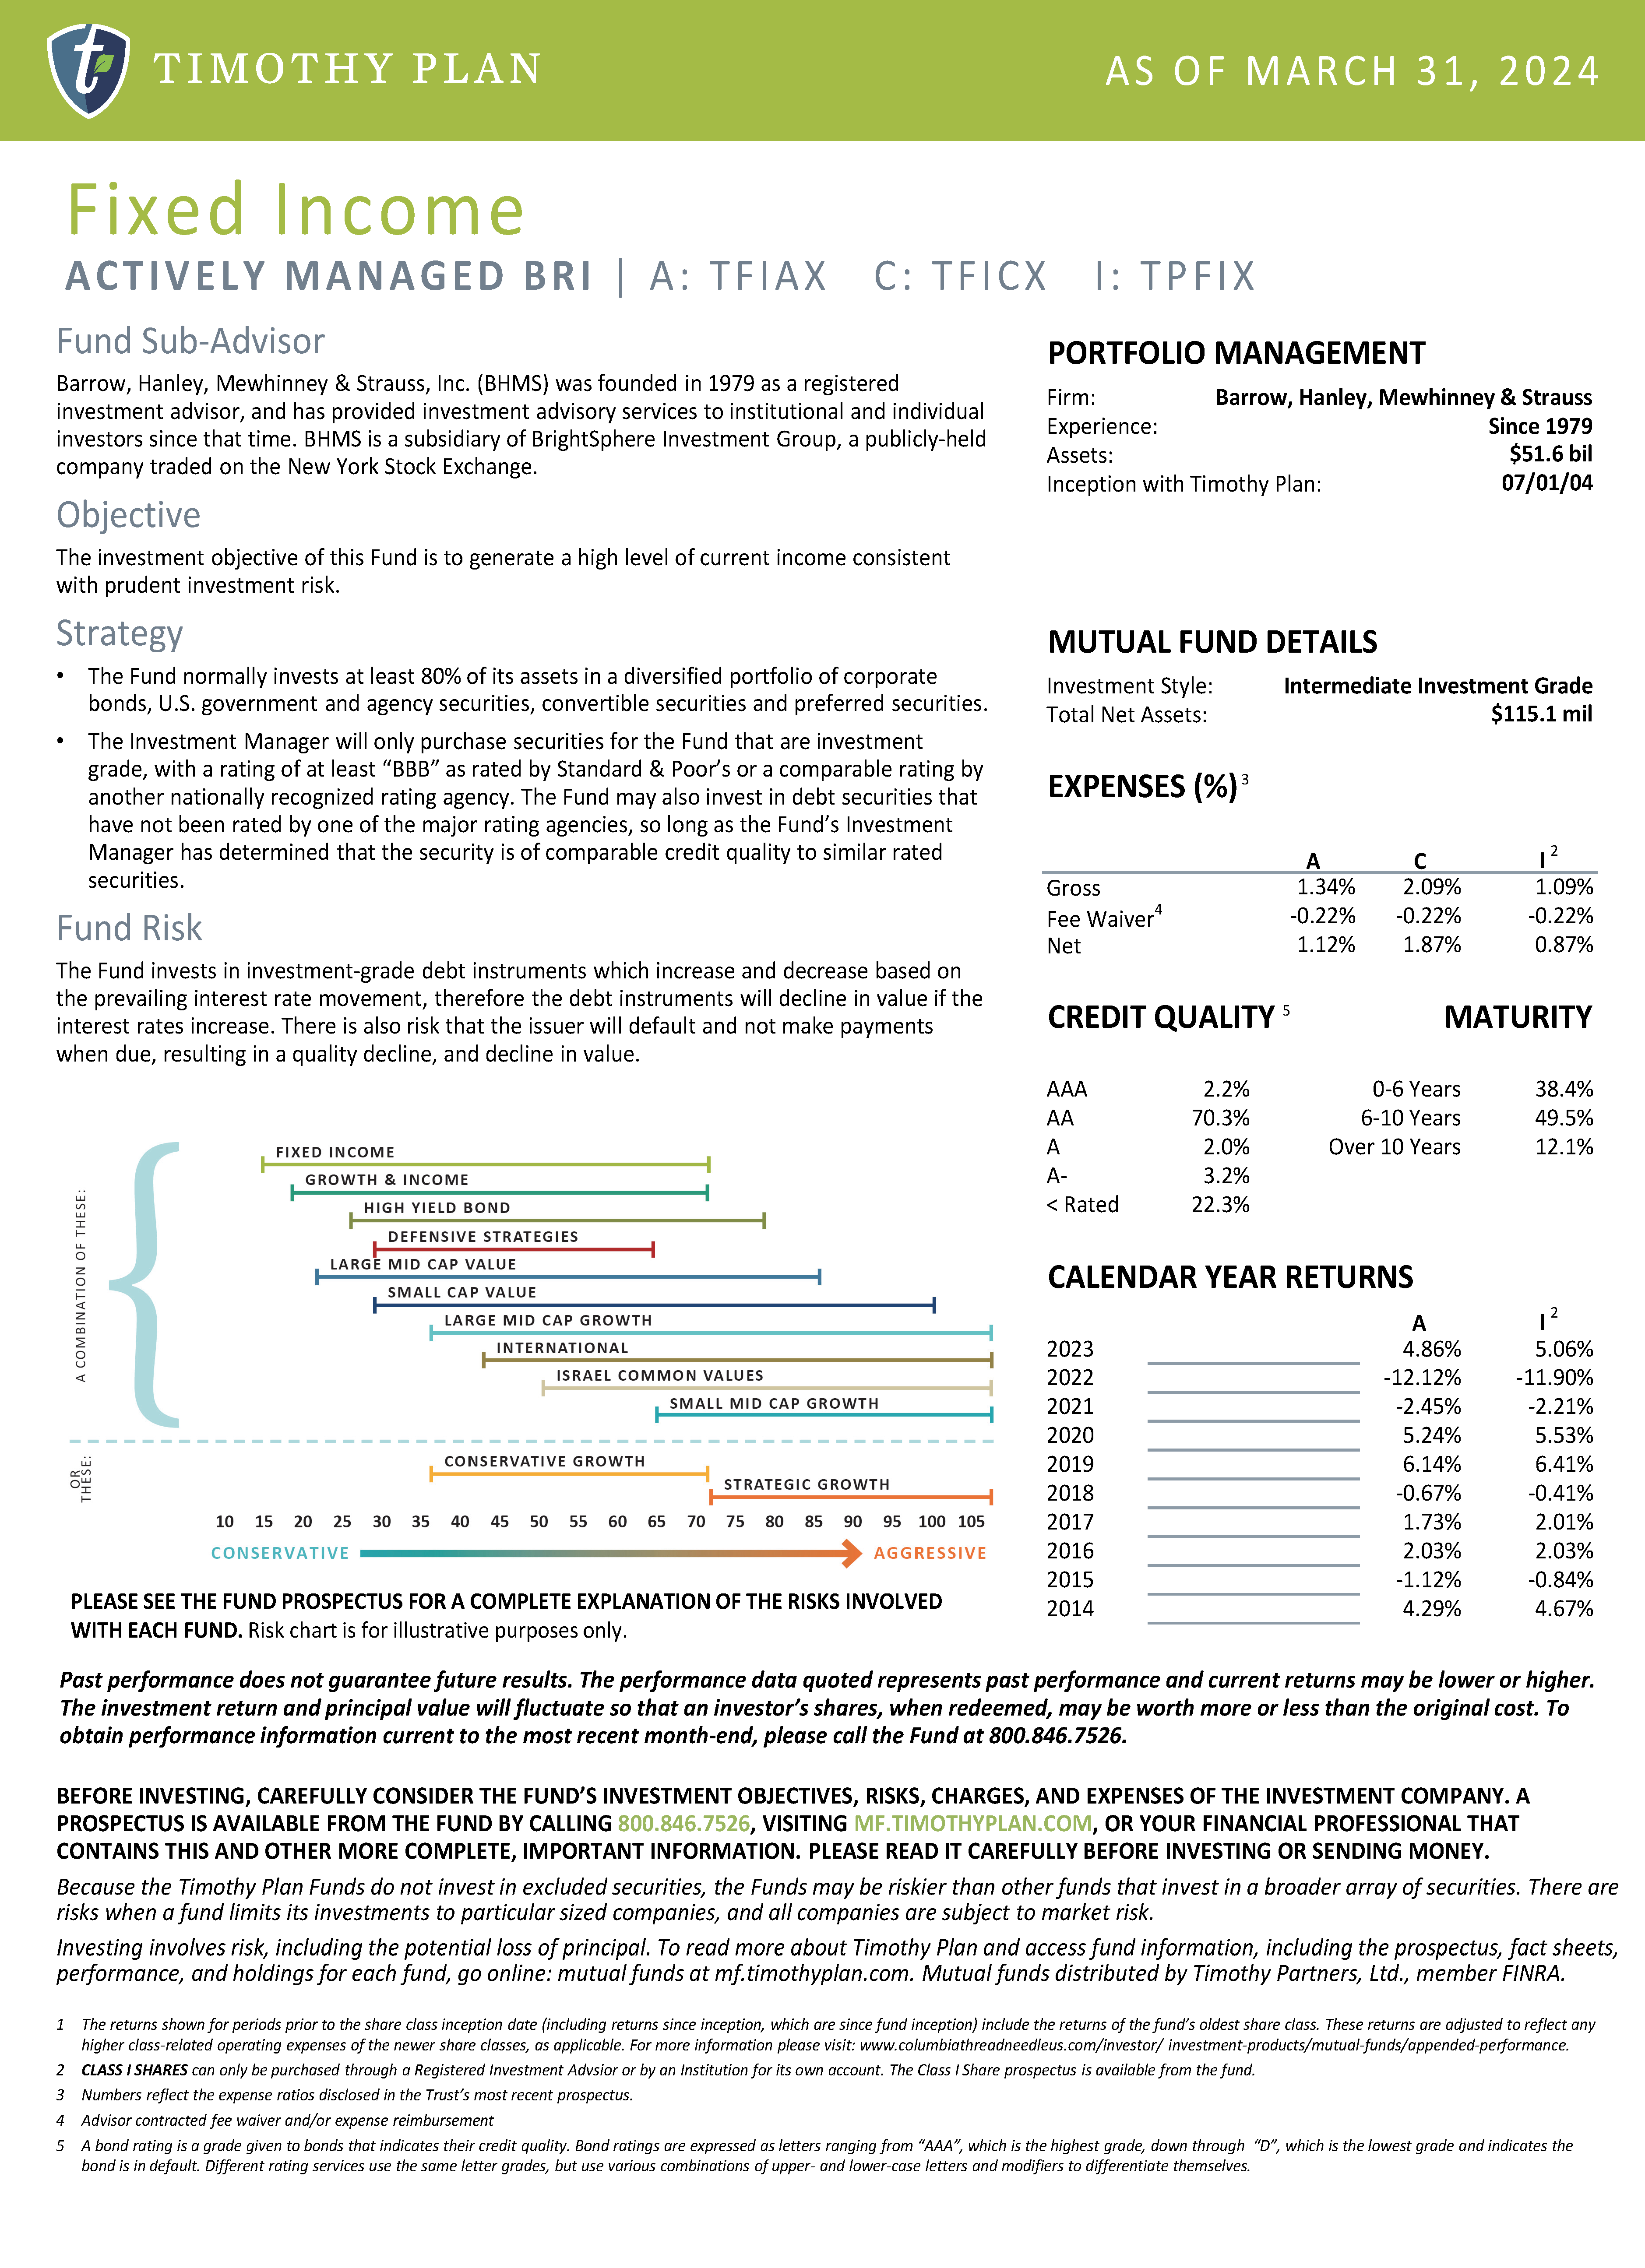 Fixed Income page 2